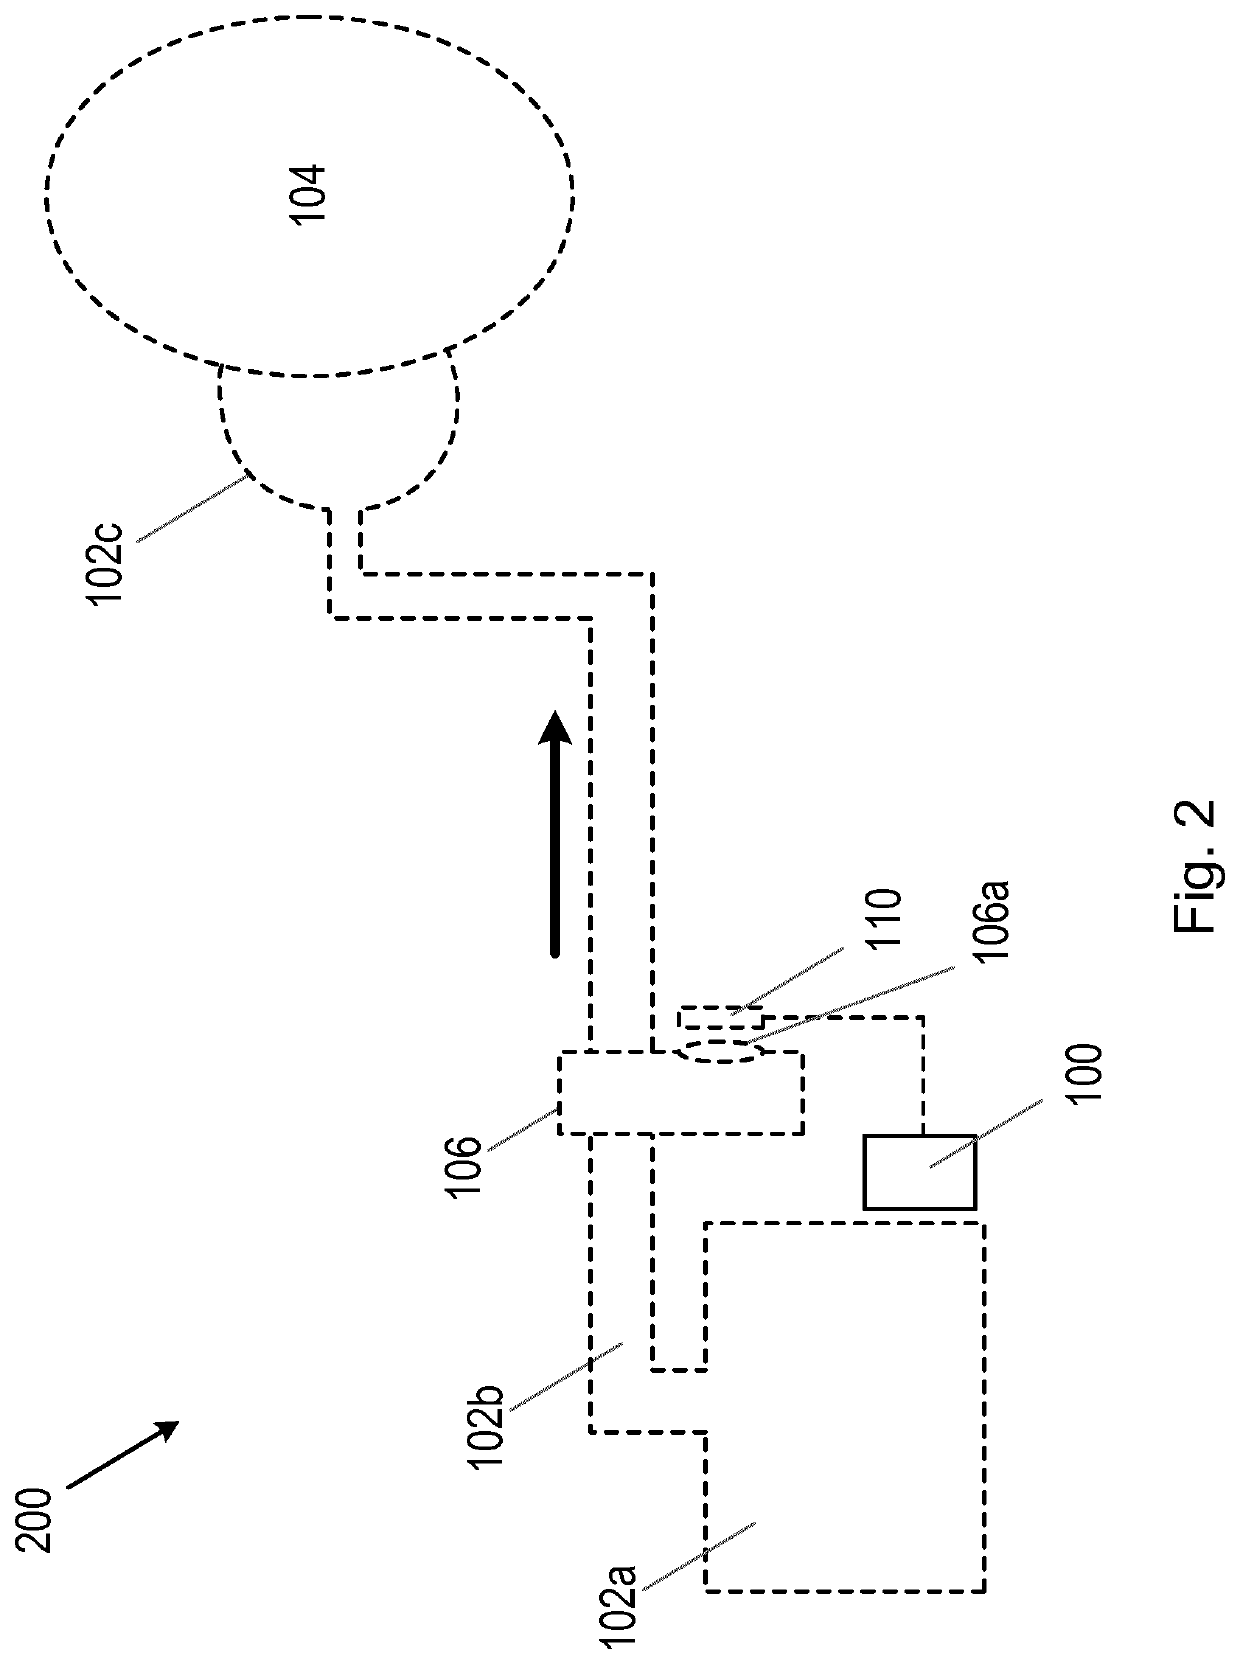 Control unit for use with a respiratory assist device